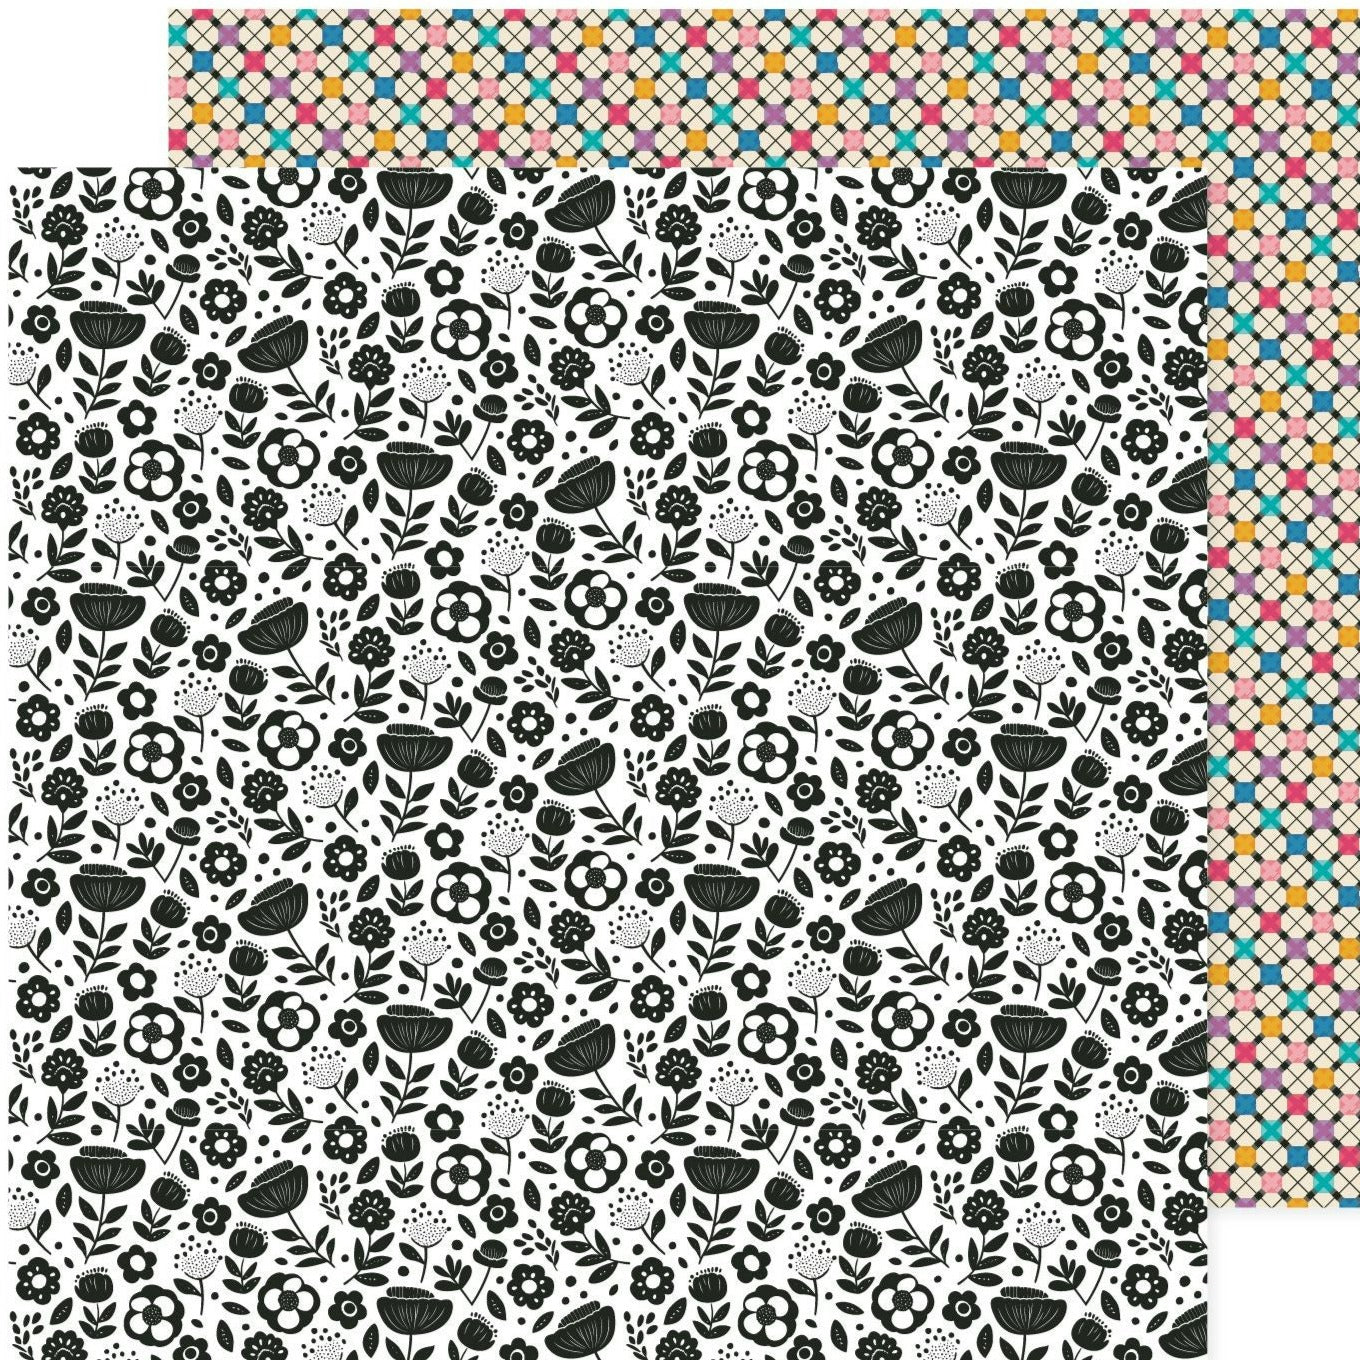 12x12 patterned cardstock. (Side A - black and white floral, Side B - colorful diagonal retro squares pattern) - Archival-safe and acid-free from American Crafts